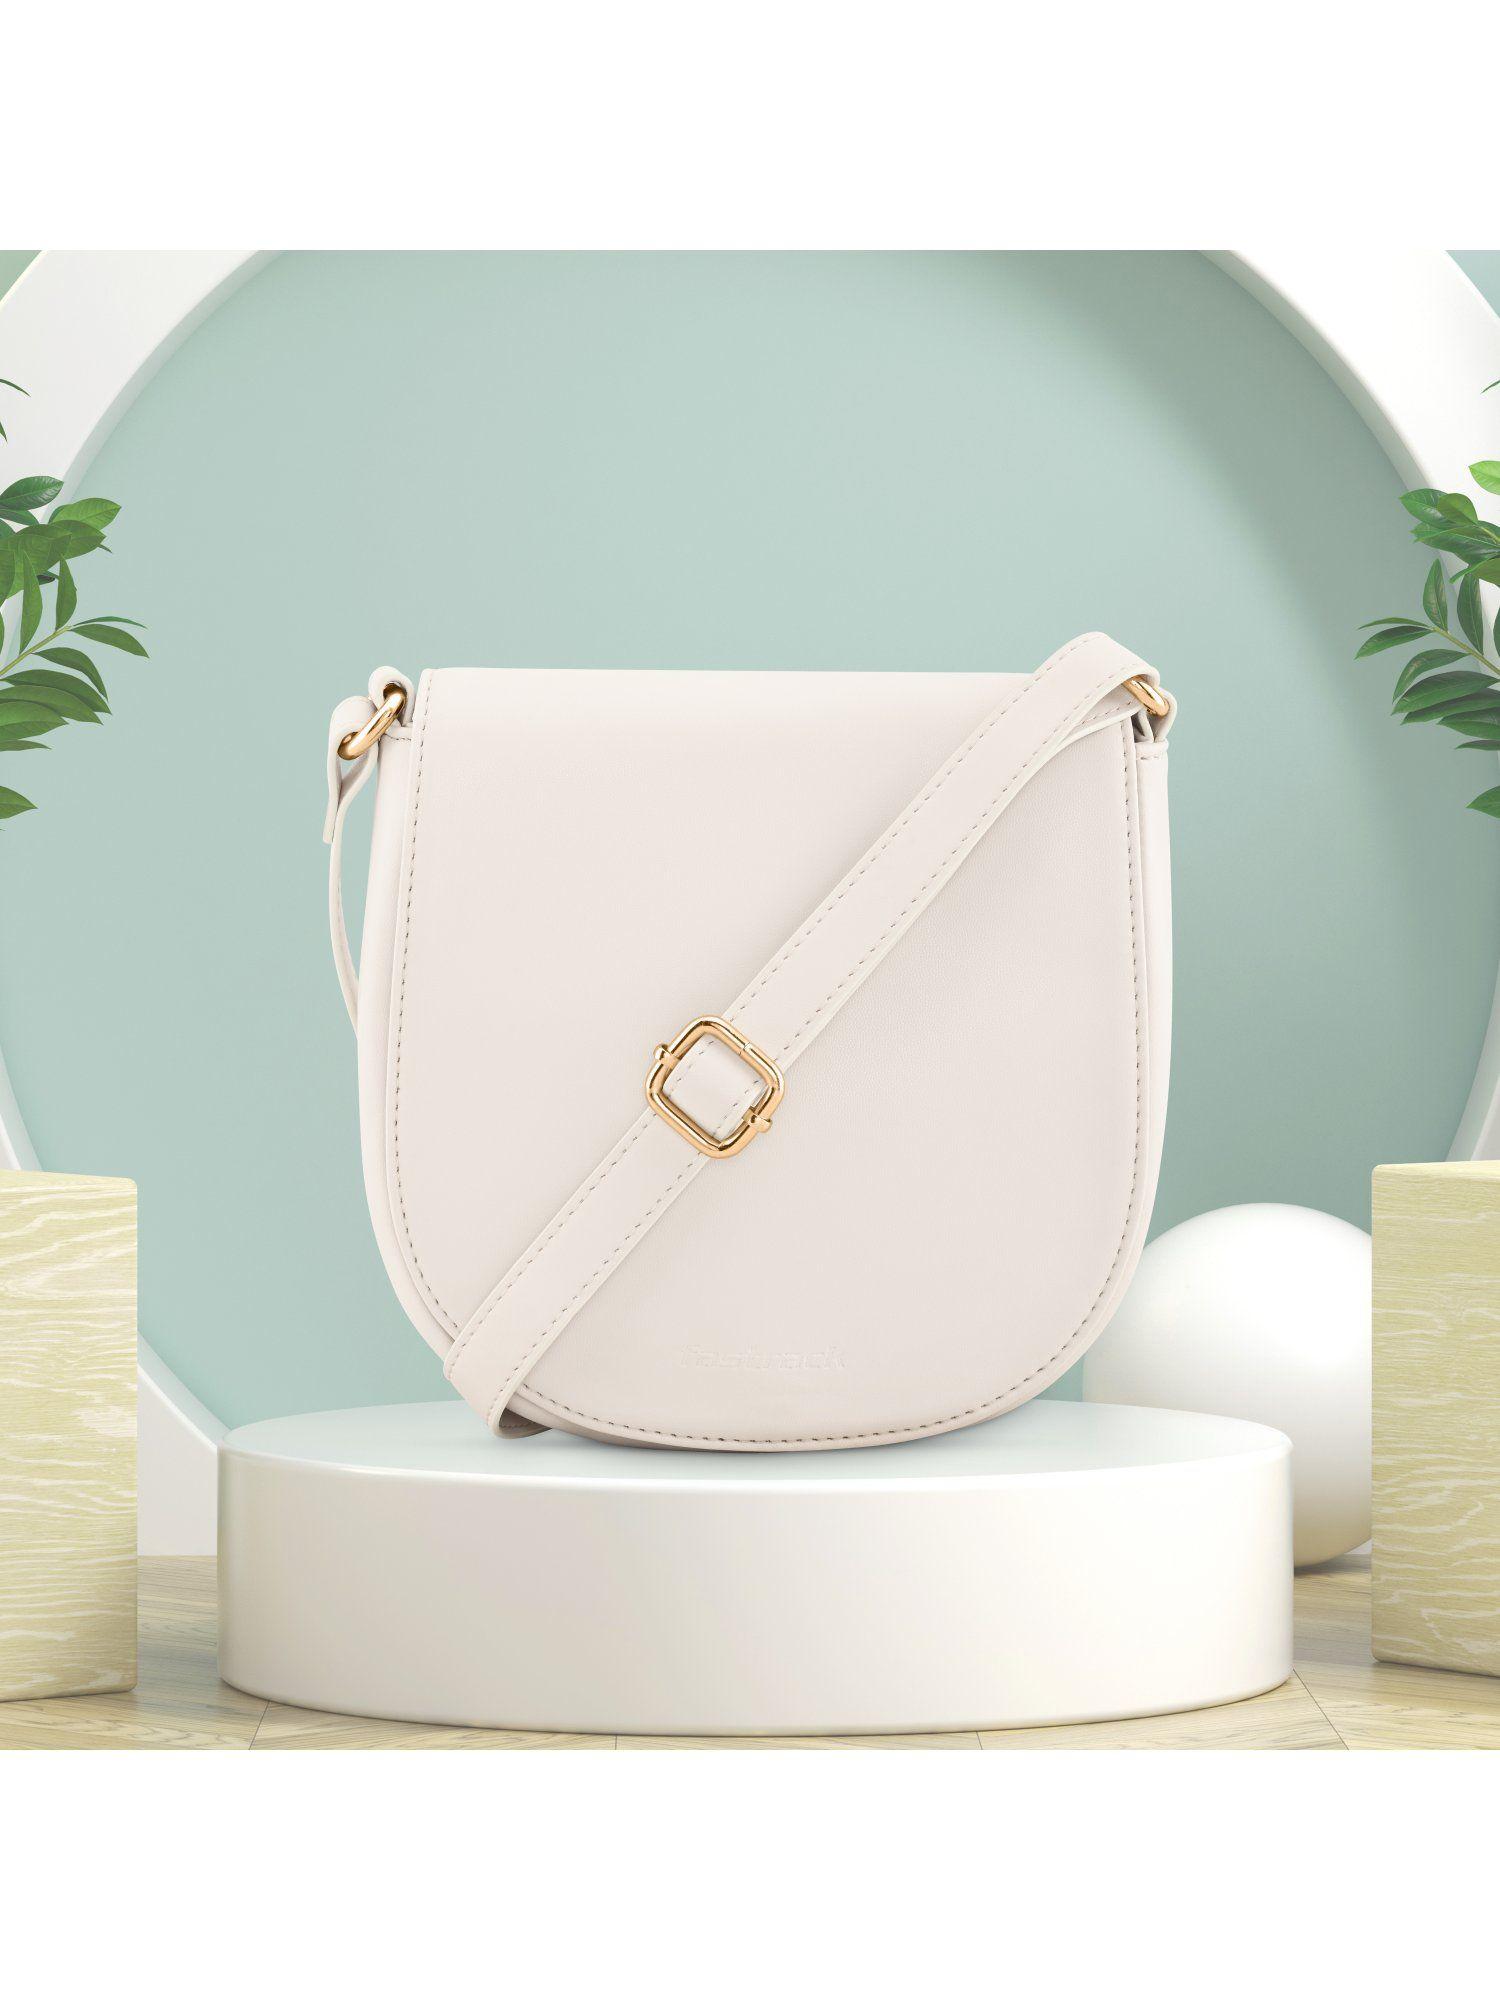 pearl white casual sling bag for women